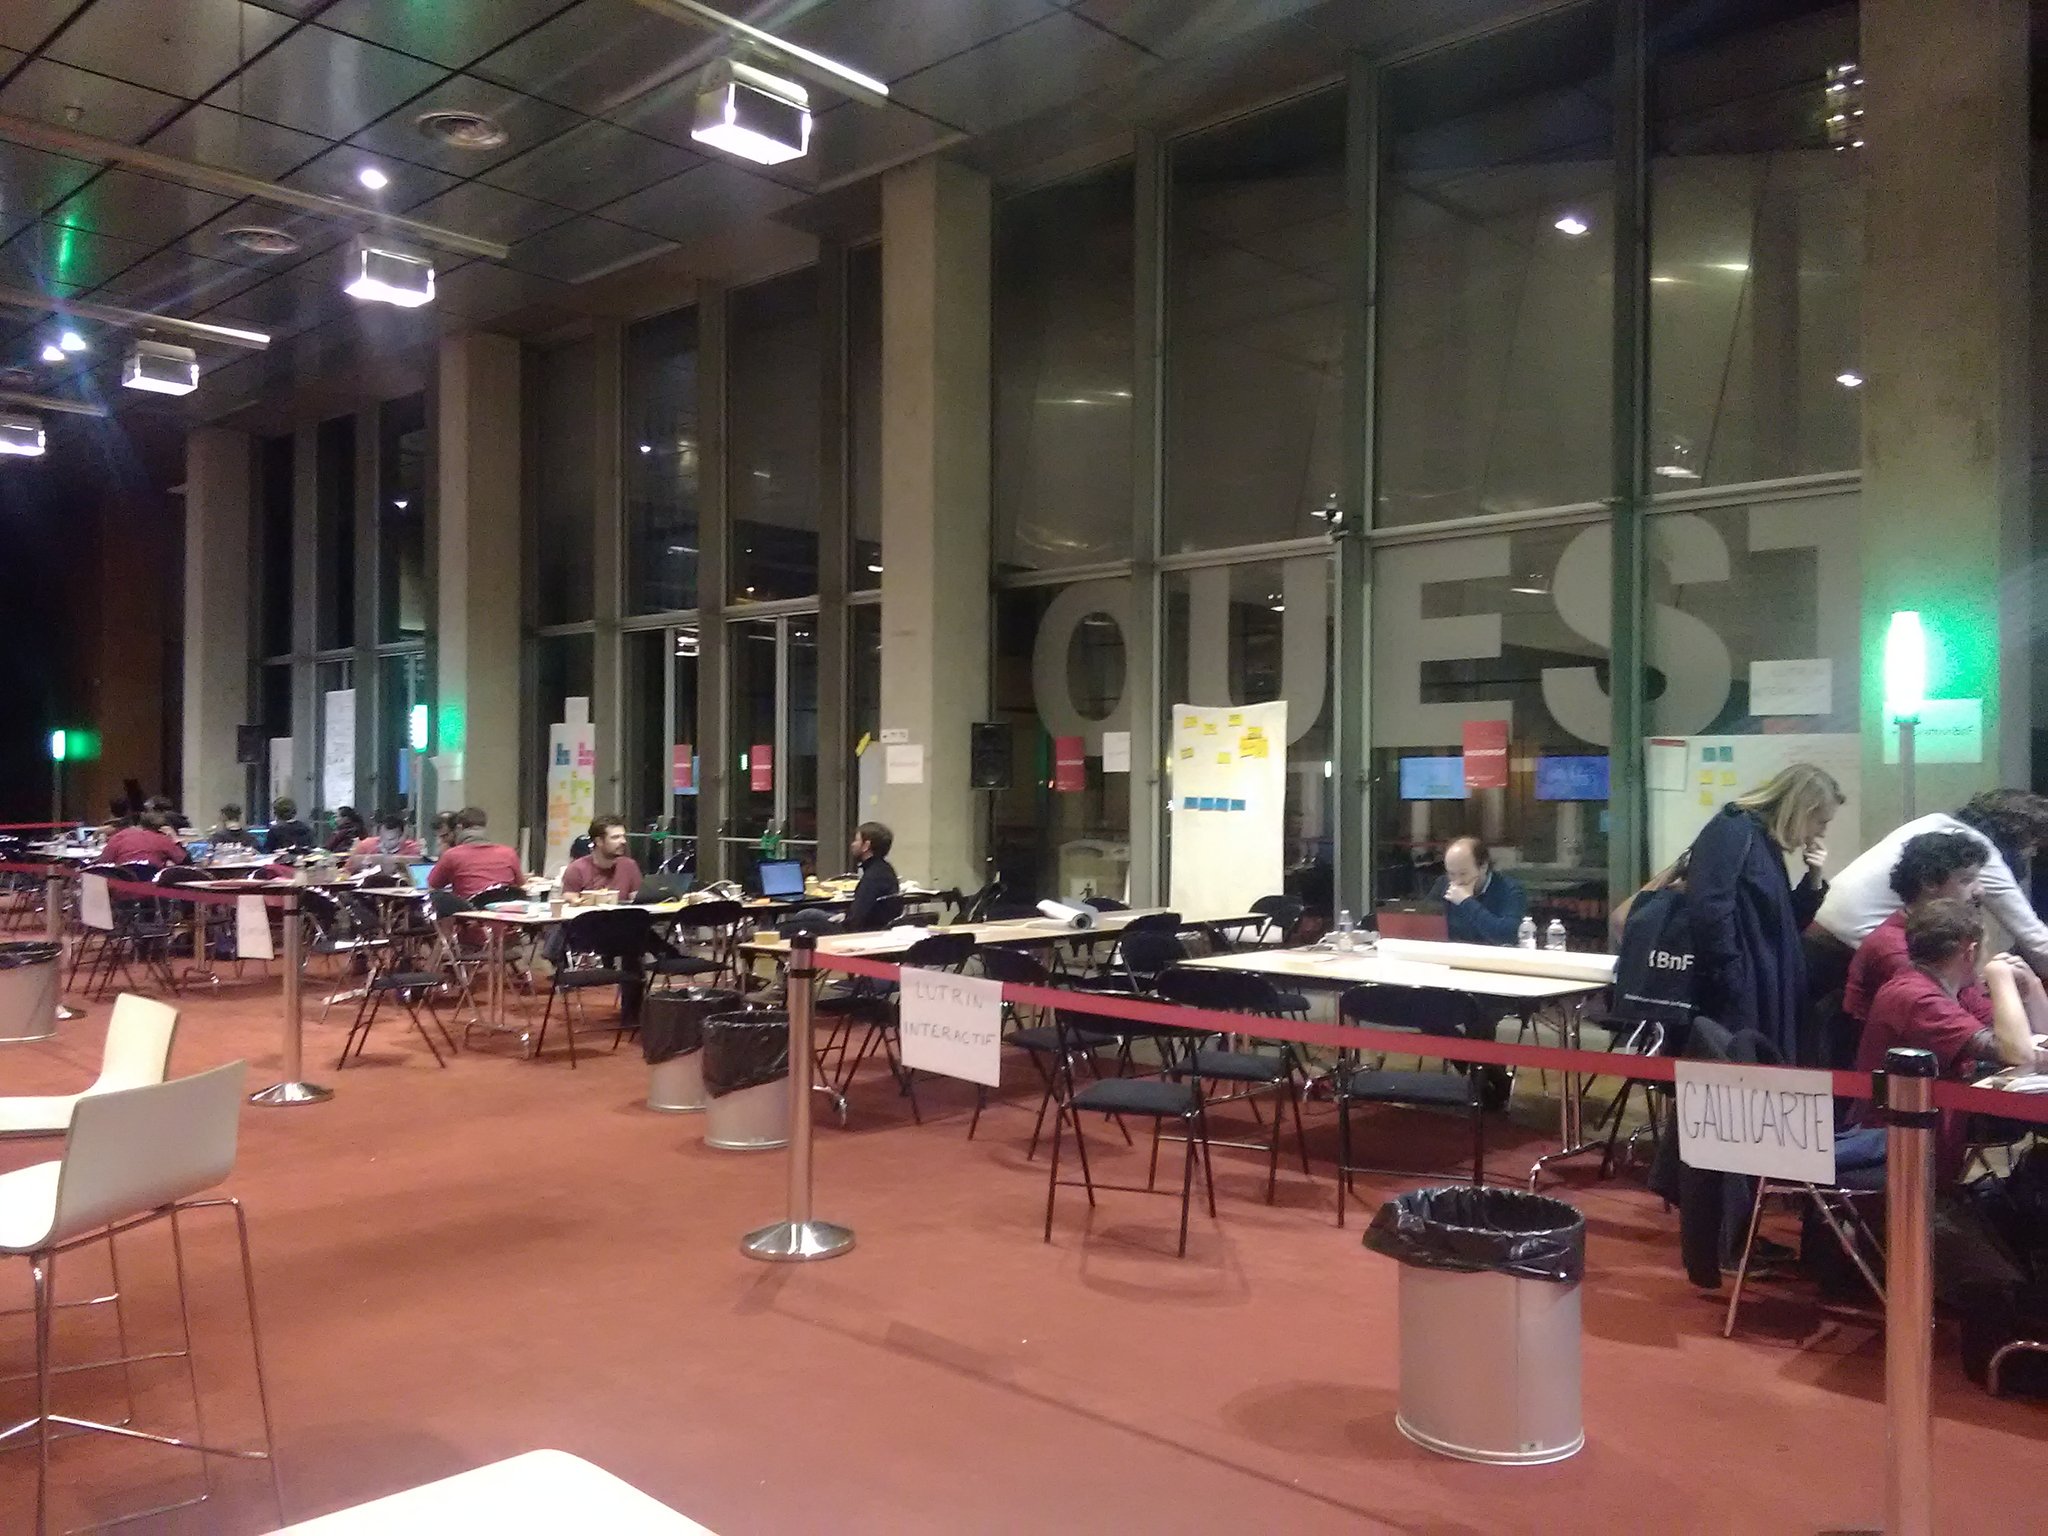 Well... It seems that Morfeo is gaining followers. 3:47am and tables seem now empty  #hackathonBnF @laBnF https://t.co/W0zA3yolCv